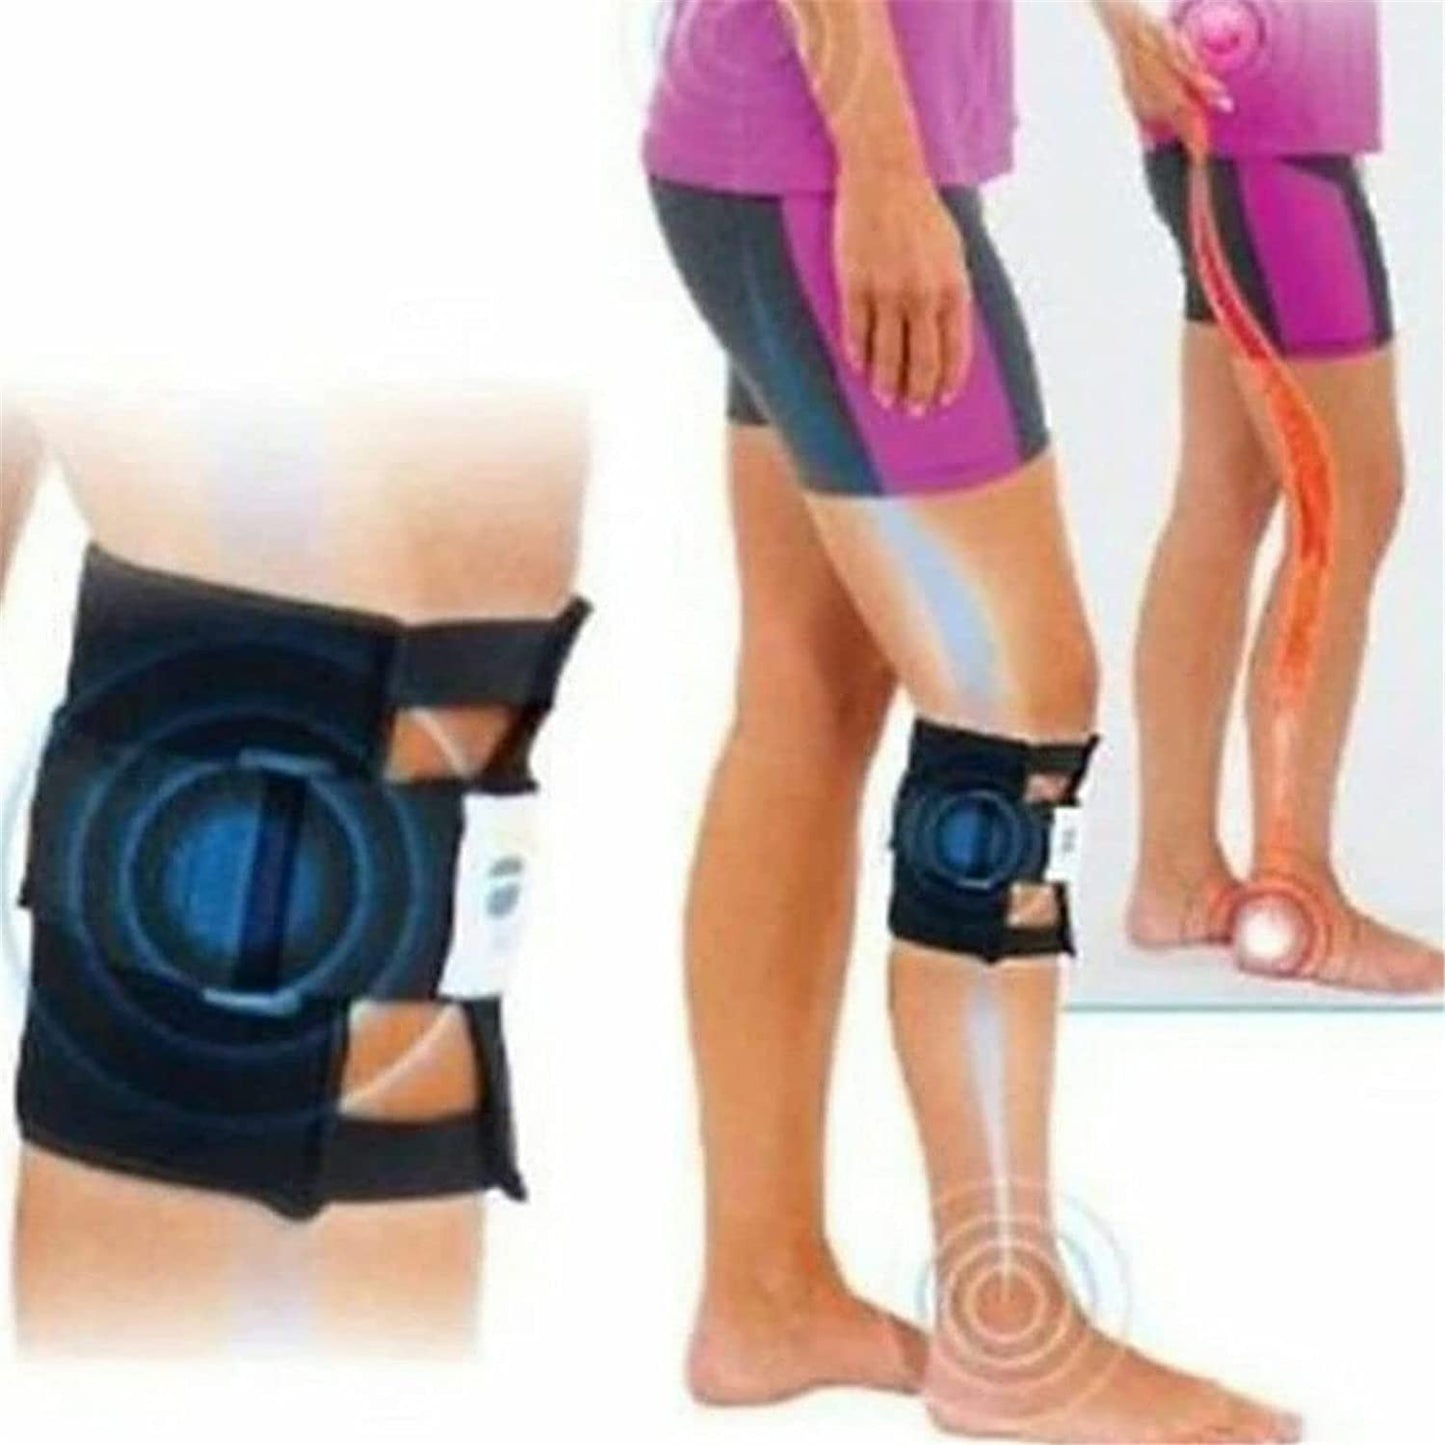 Pressure Point Brace Relieve Acupressure Leg Sciatica - Body Trigger Point Massager, Myofascial Release Tool, Adjustable Compression Knee Support Braces for Knee Pain